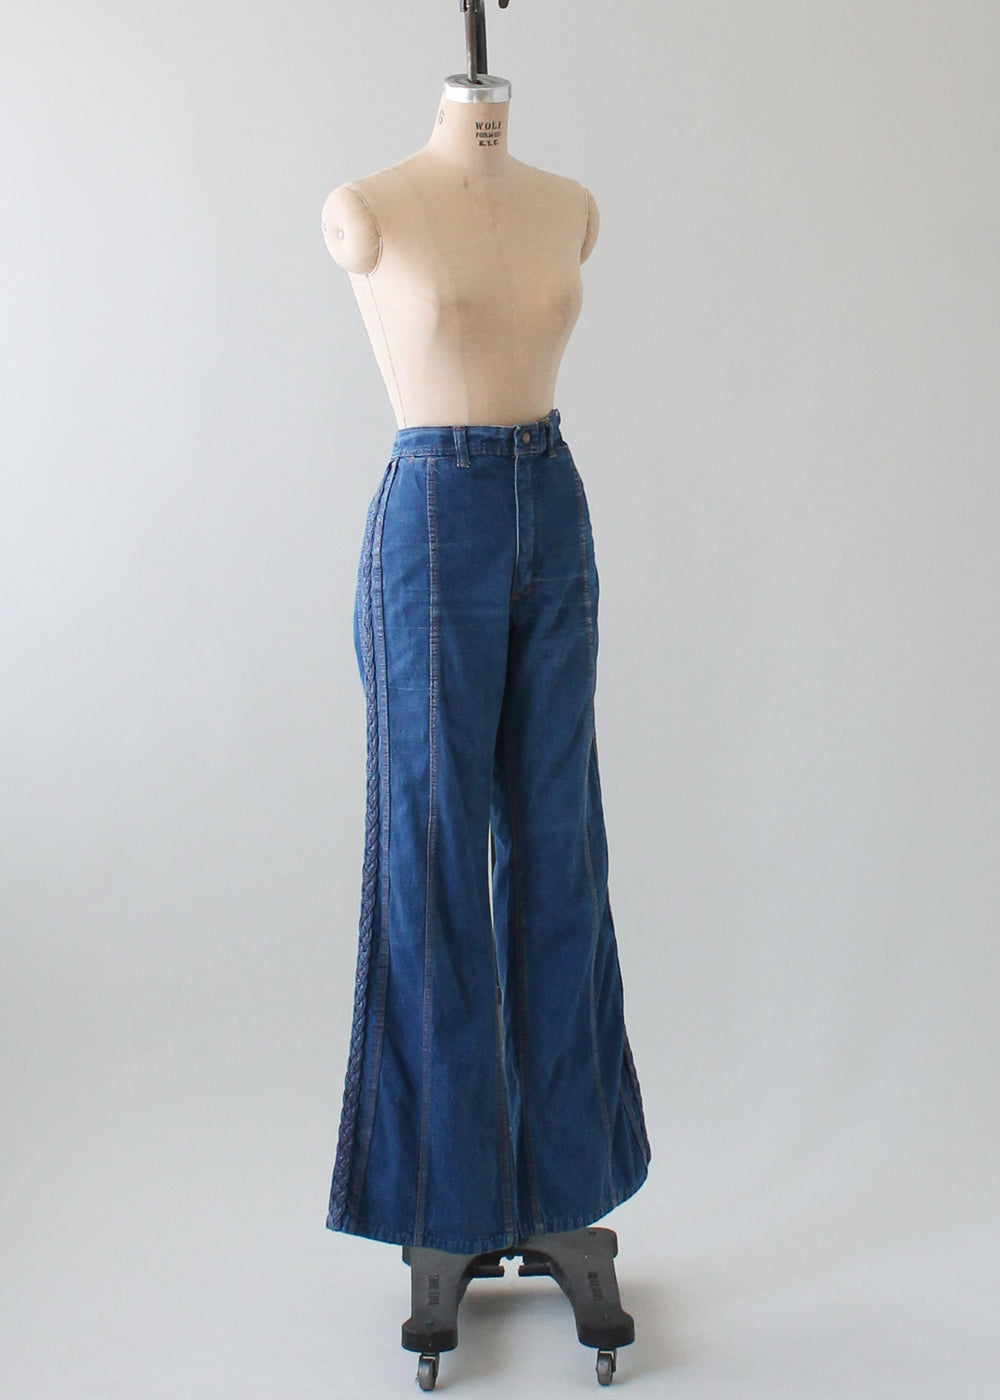 Vintage 1970s Red Snap Bell Bottom Jeans - Raleigh Vintage